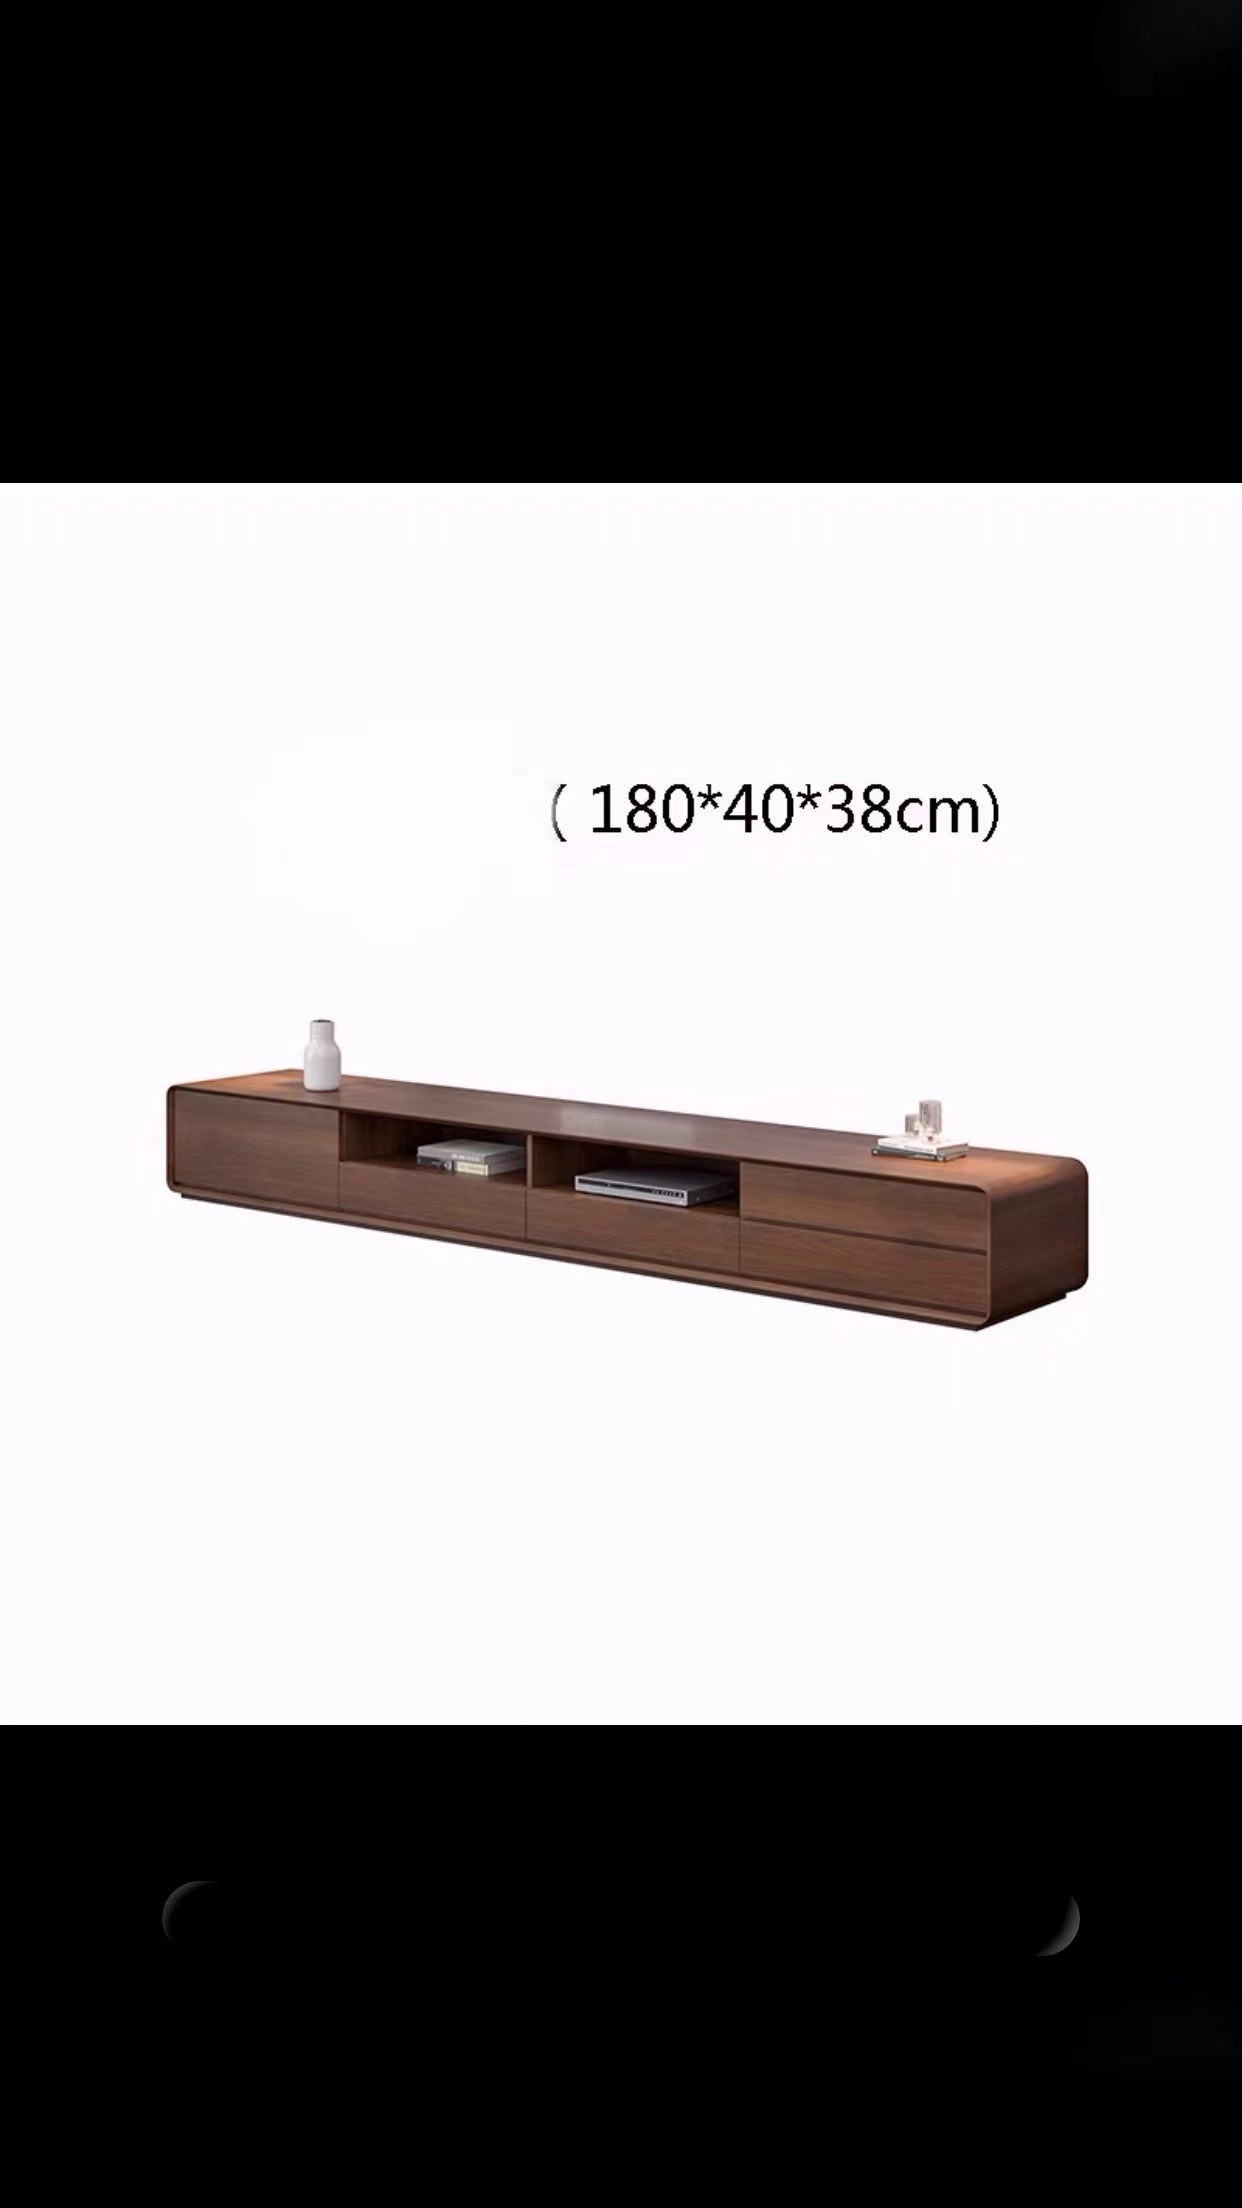 Lucy-Mae Media Console - 4 Seasons Home Gadgets